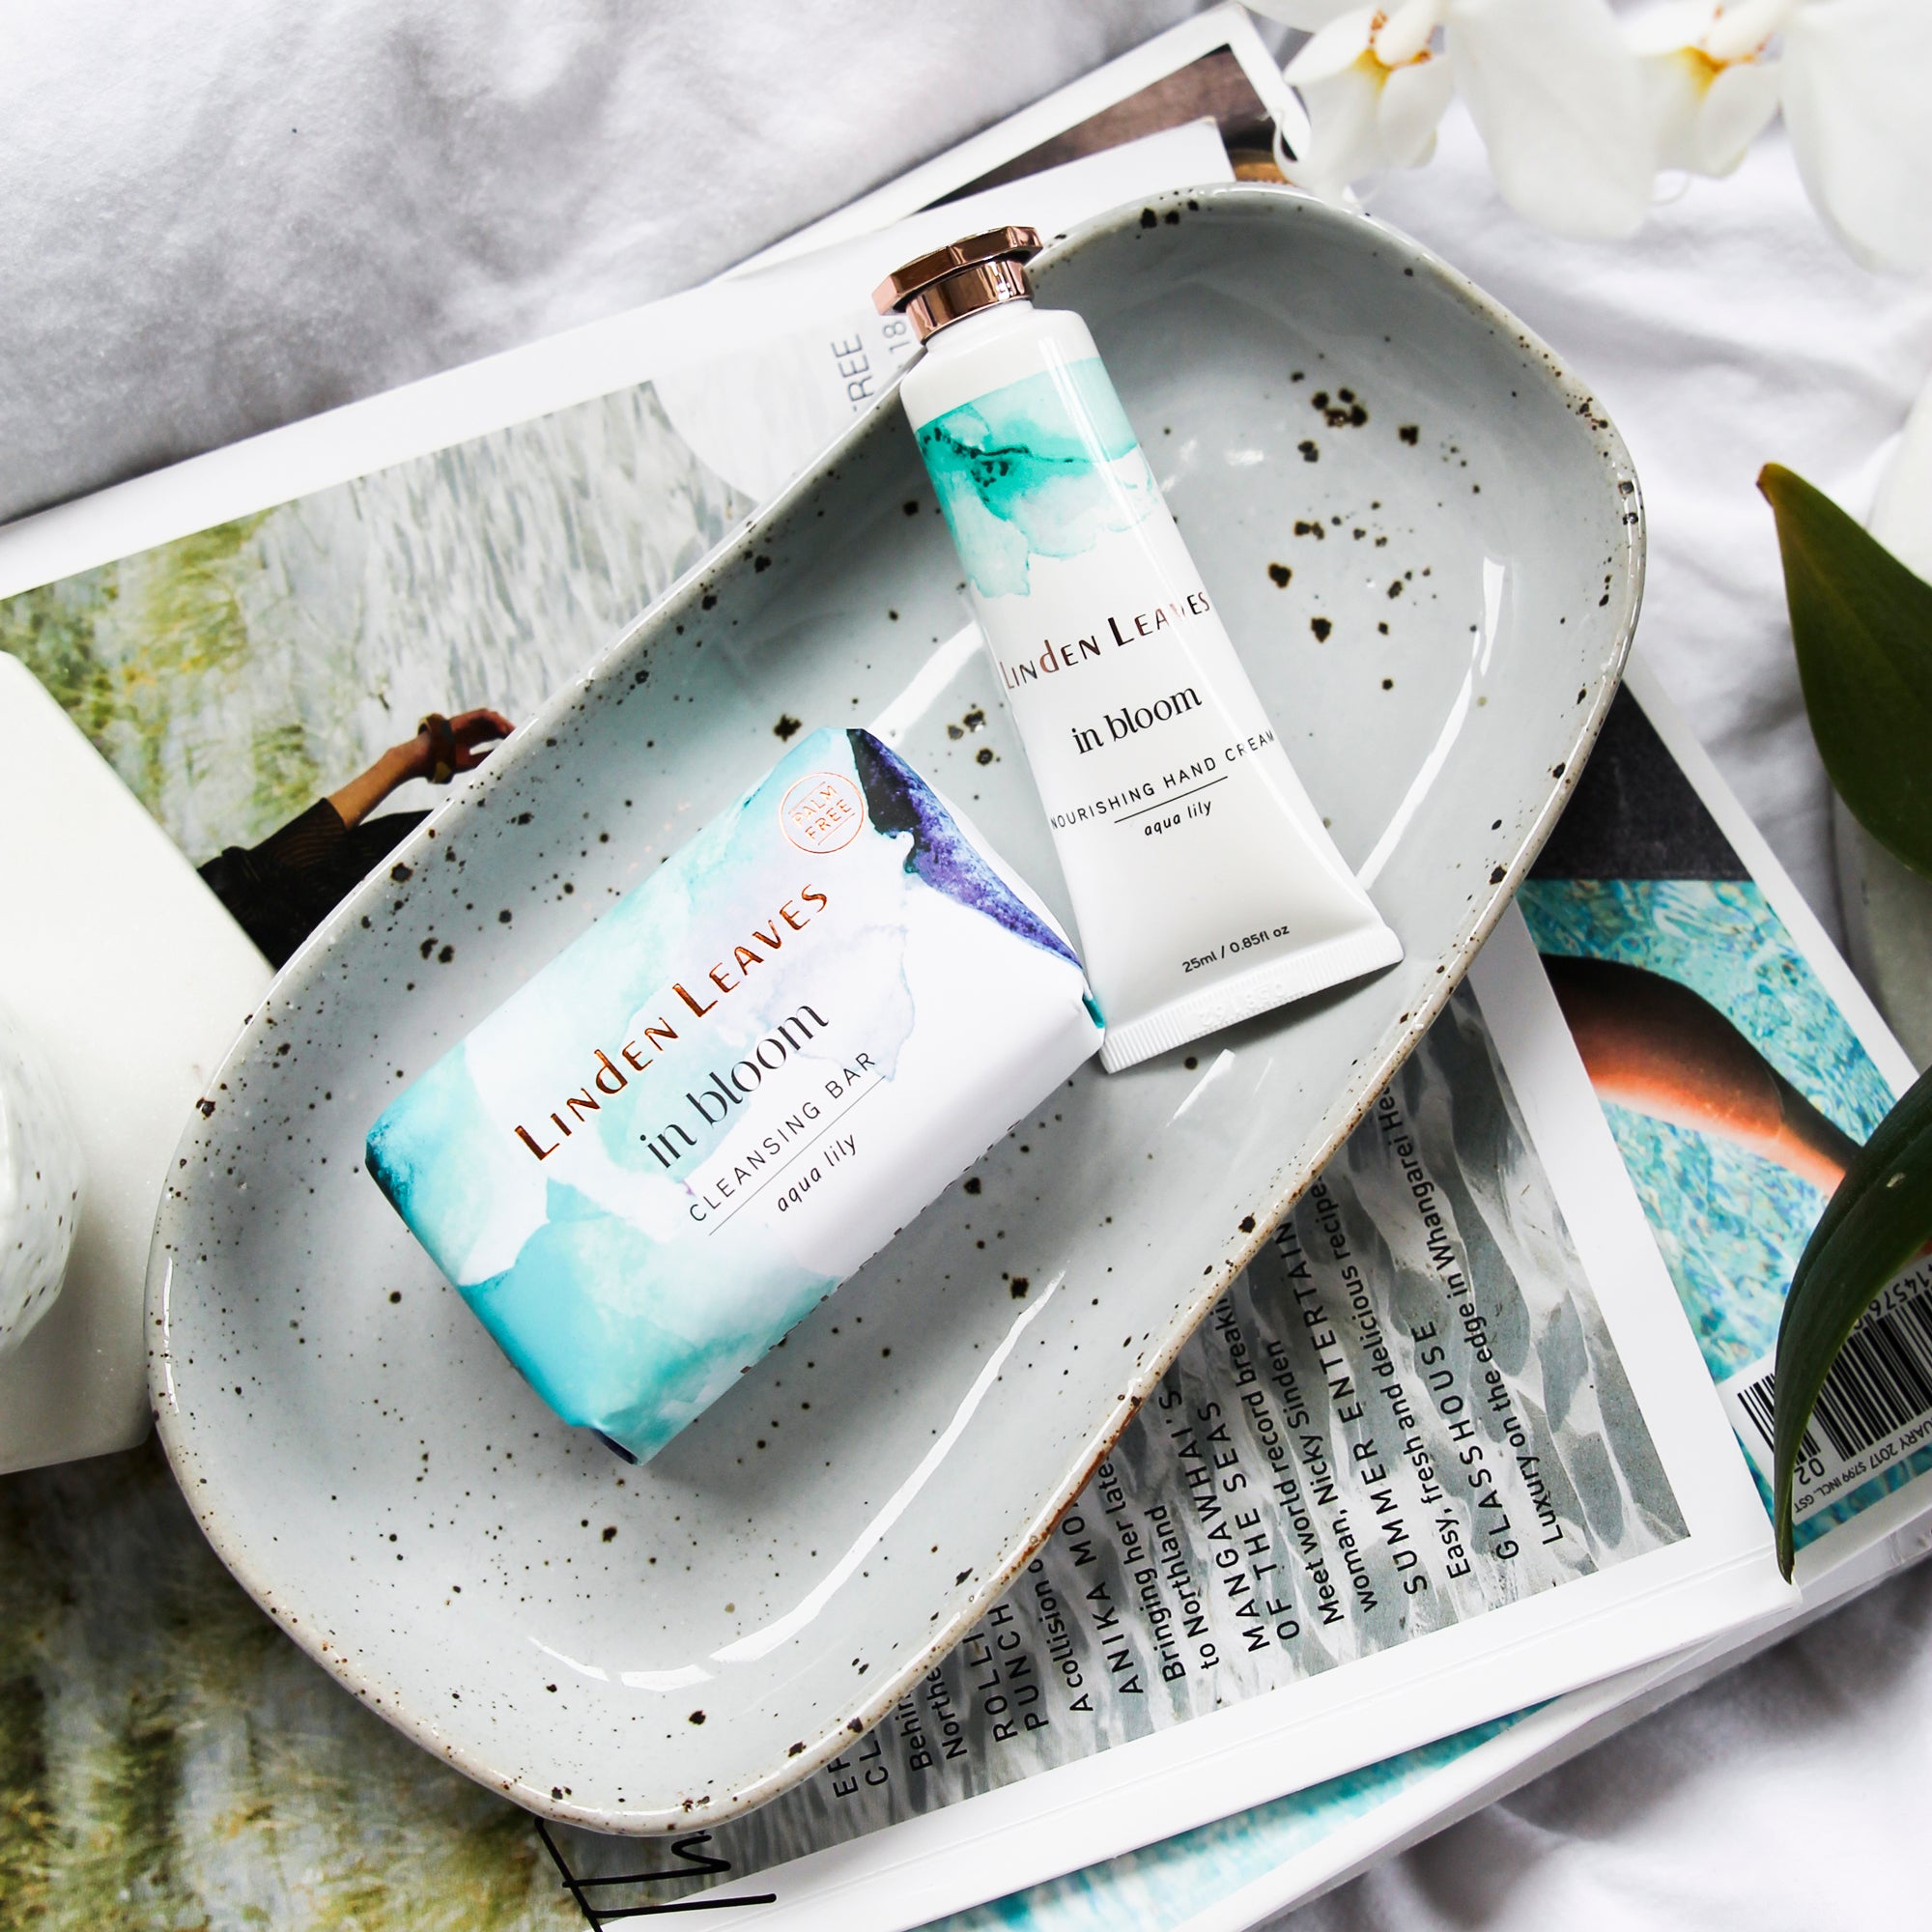 Linden Leaves In Bloom Hand Cream & Cleansing Bar Blue.